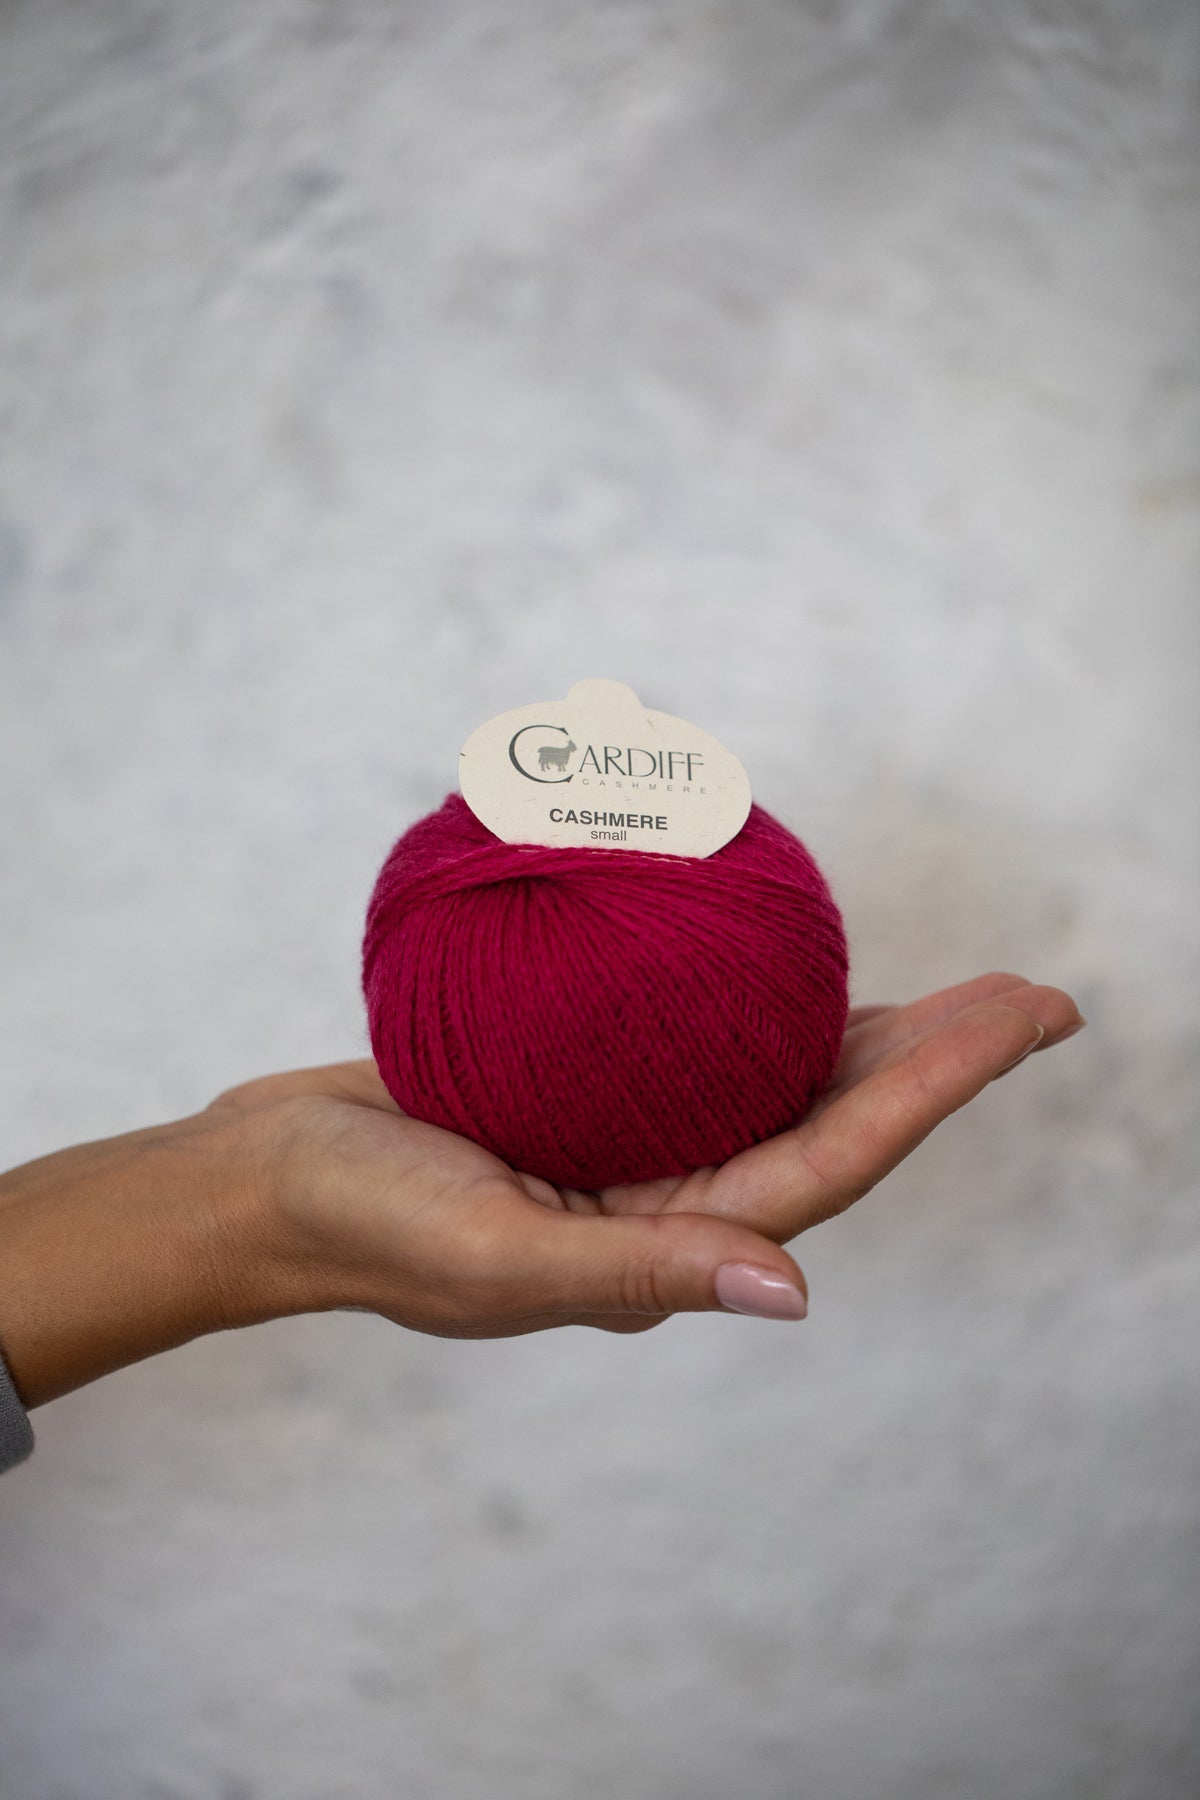 Cardiff SMALL - a gentle yarn ball in hand comp: 100% Cashmere